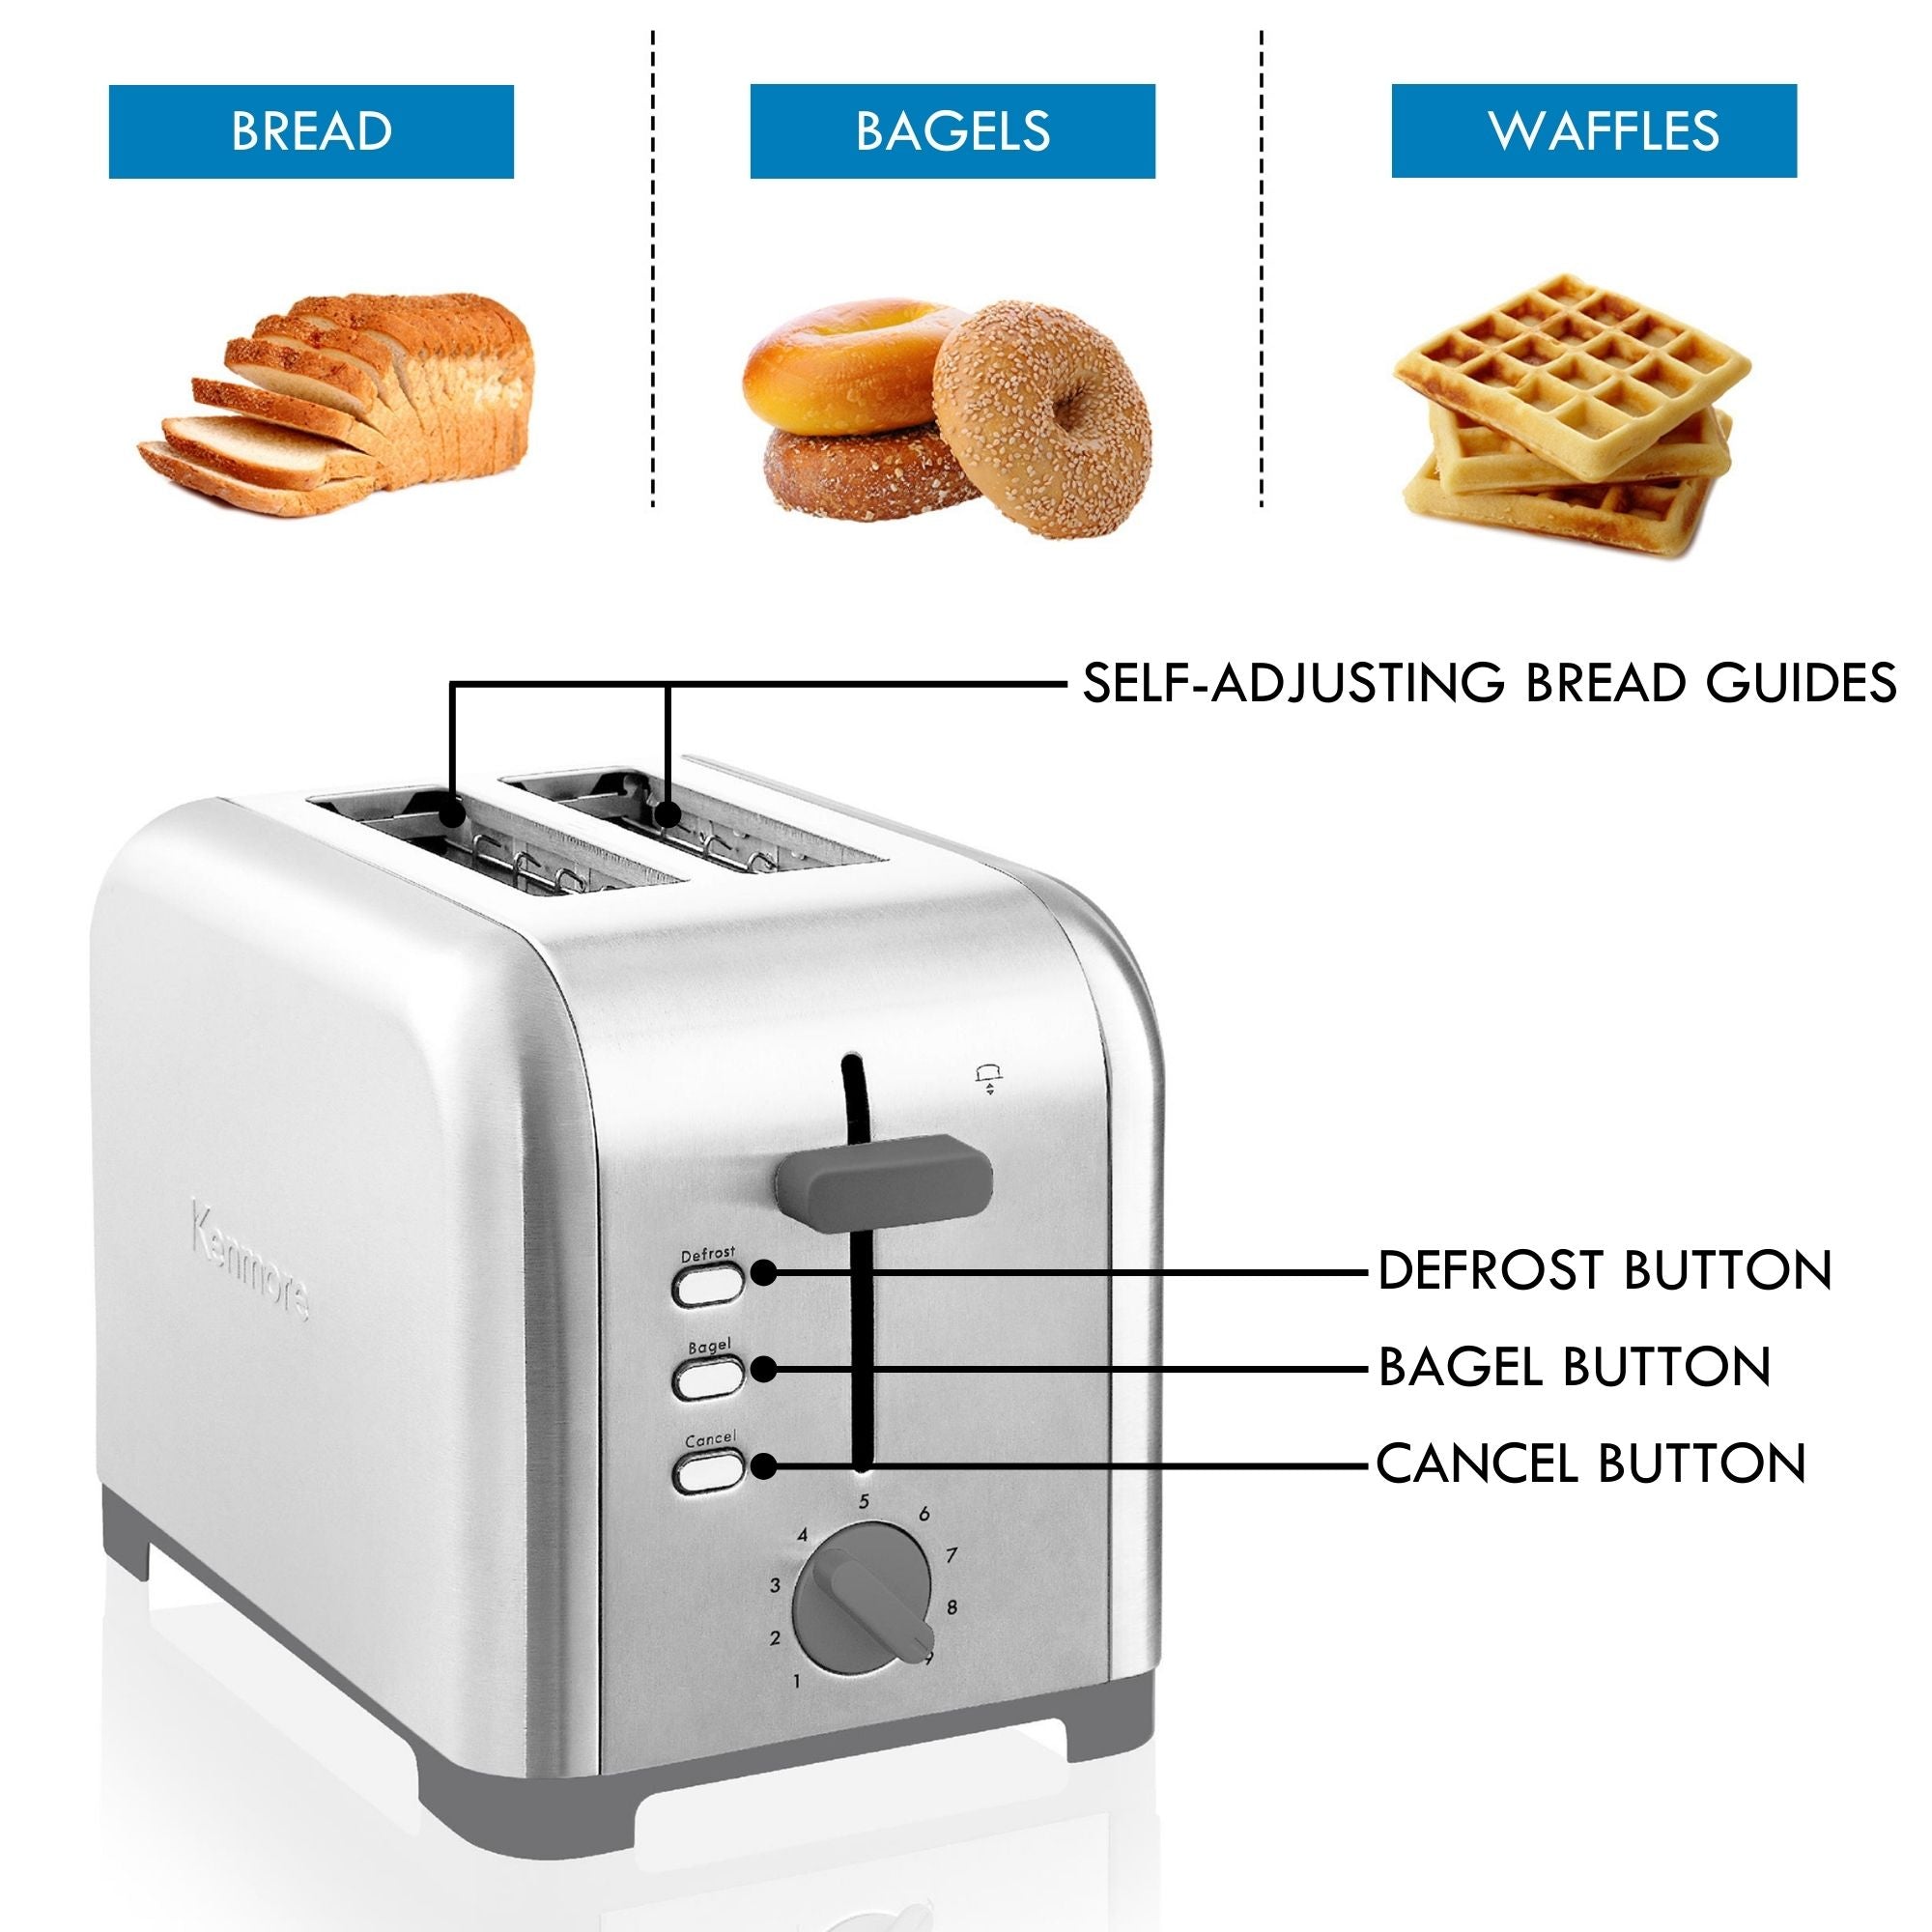 Kenmore 2-slice stainless steel toaster with parts labeled: Self-adjusting bread guides; defrost button; bagel button; cancel button. Above are small pictures of a loaf of bread, a stack of bagels, and a stack of waffles, labeled